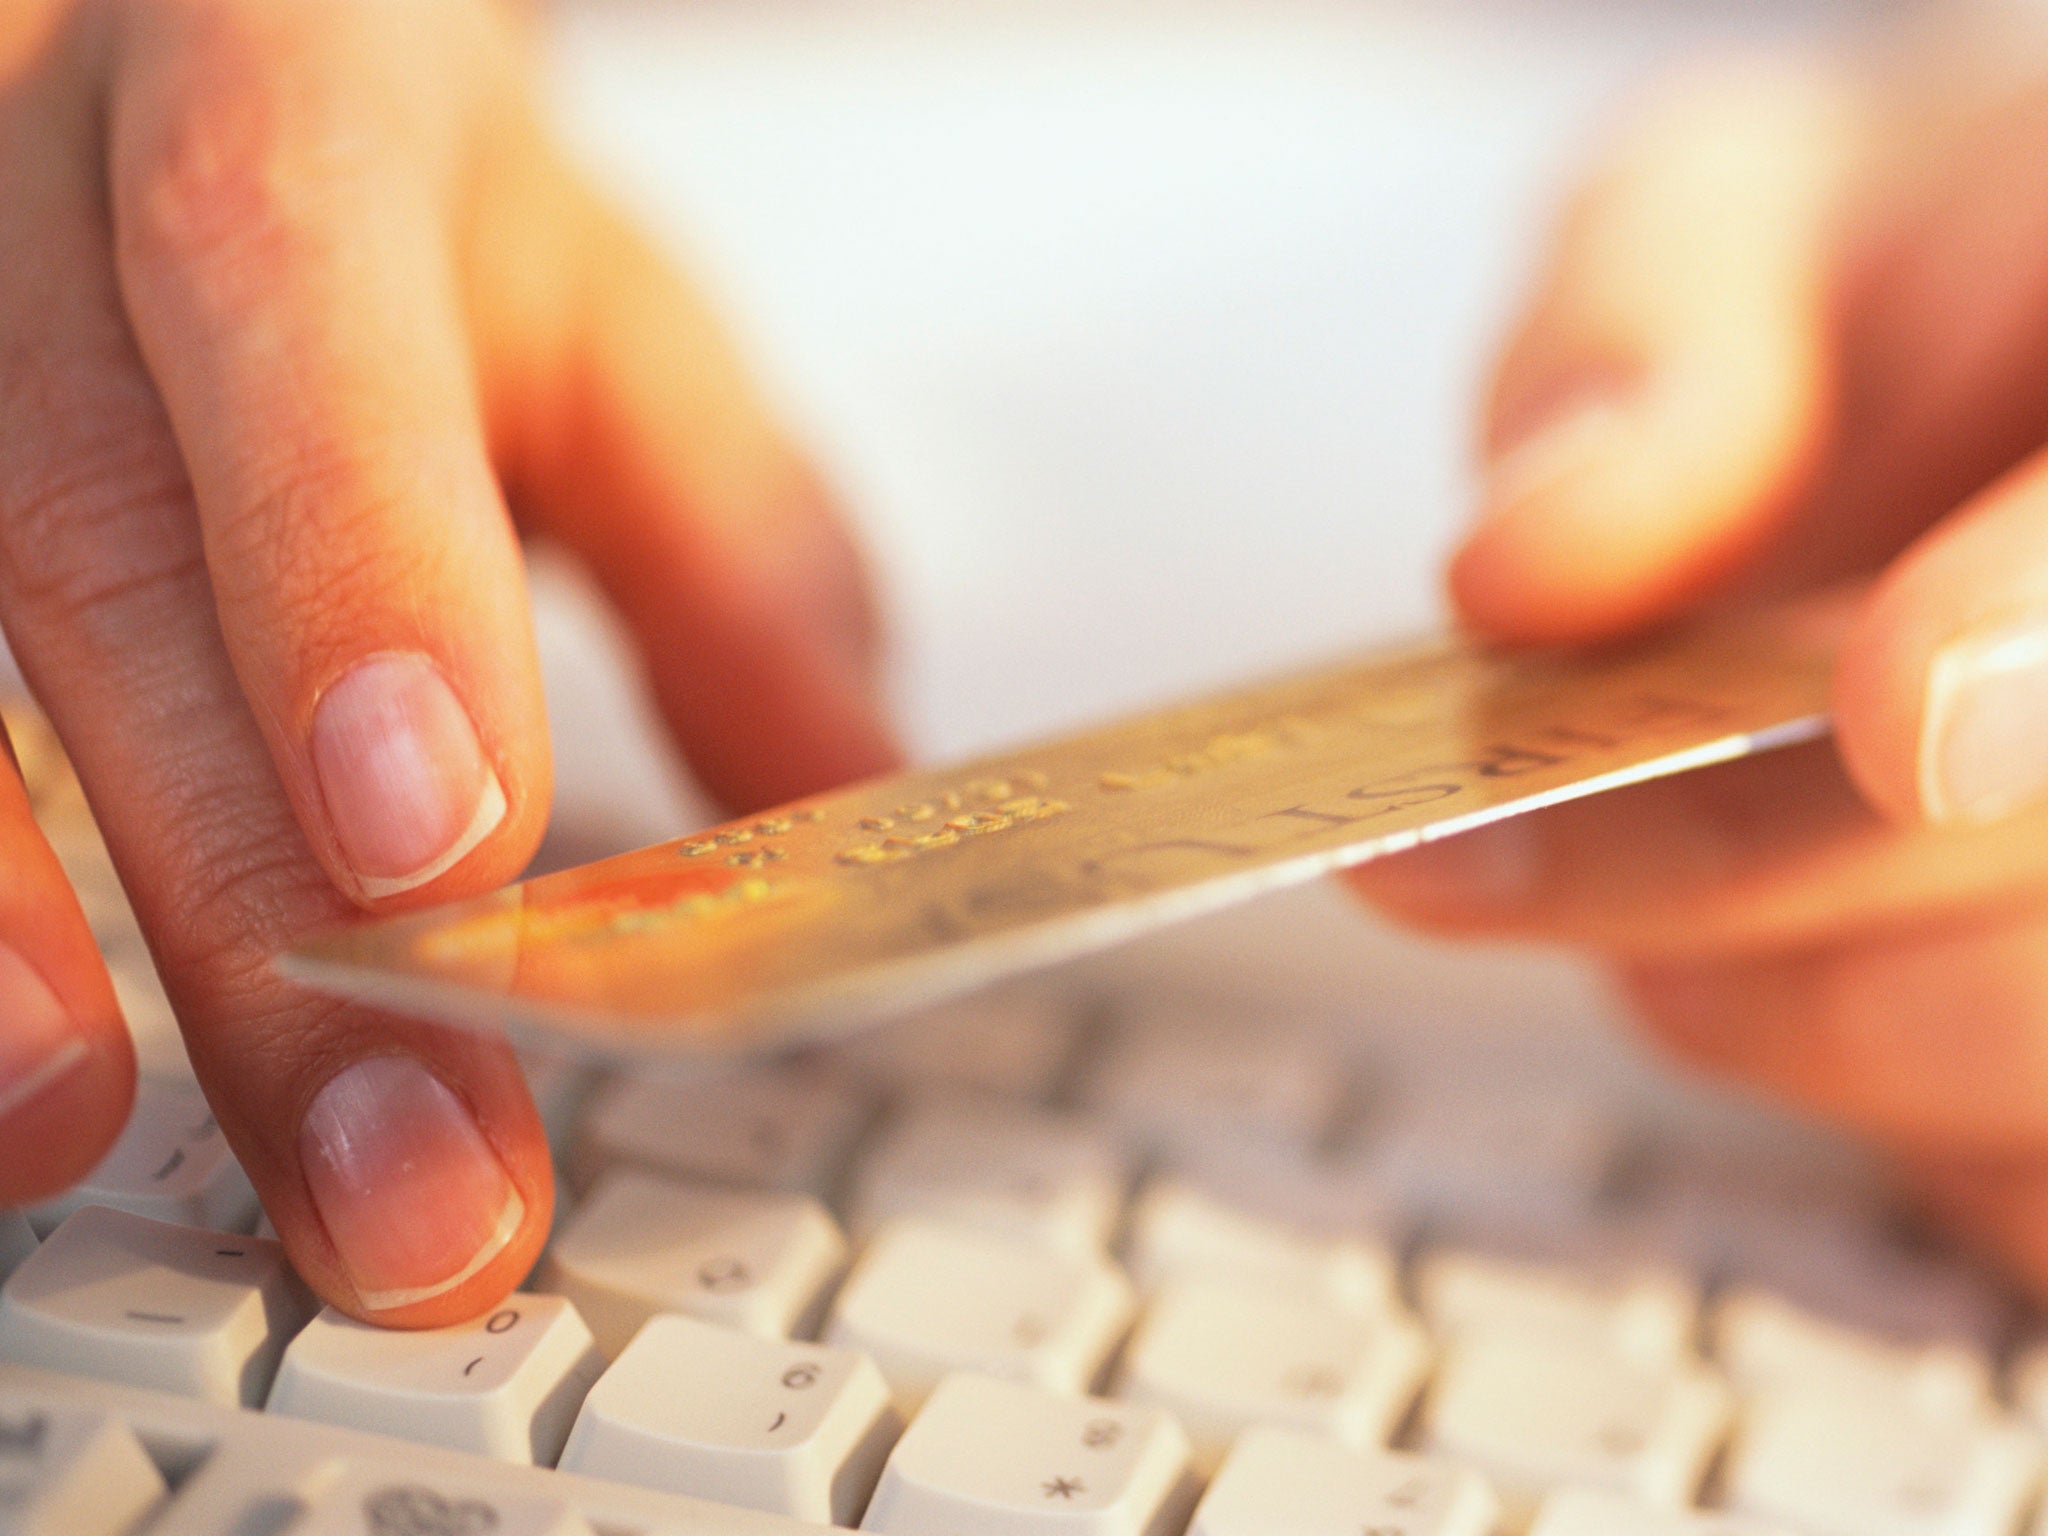 It is too easy to spend money online, particularly when sites have your card details stored